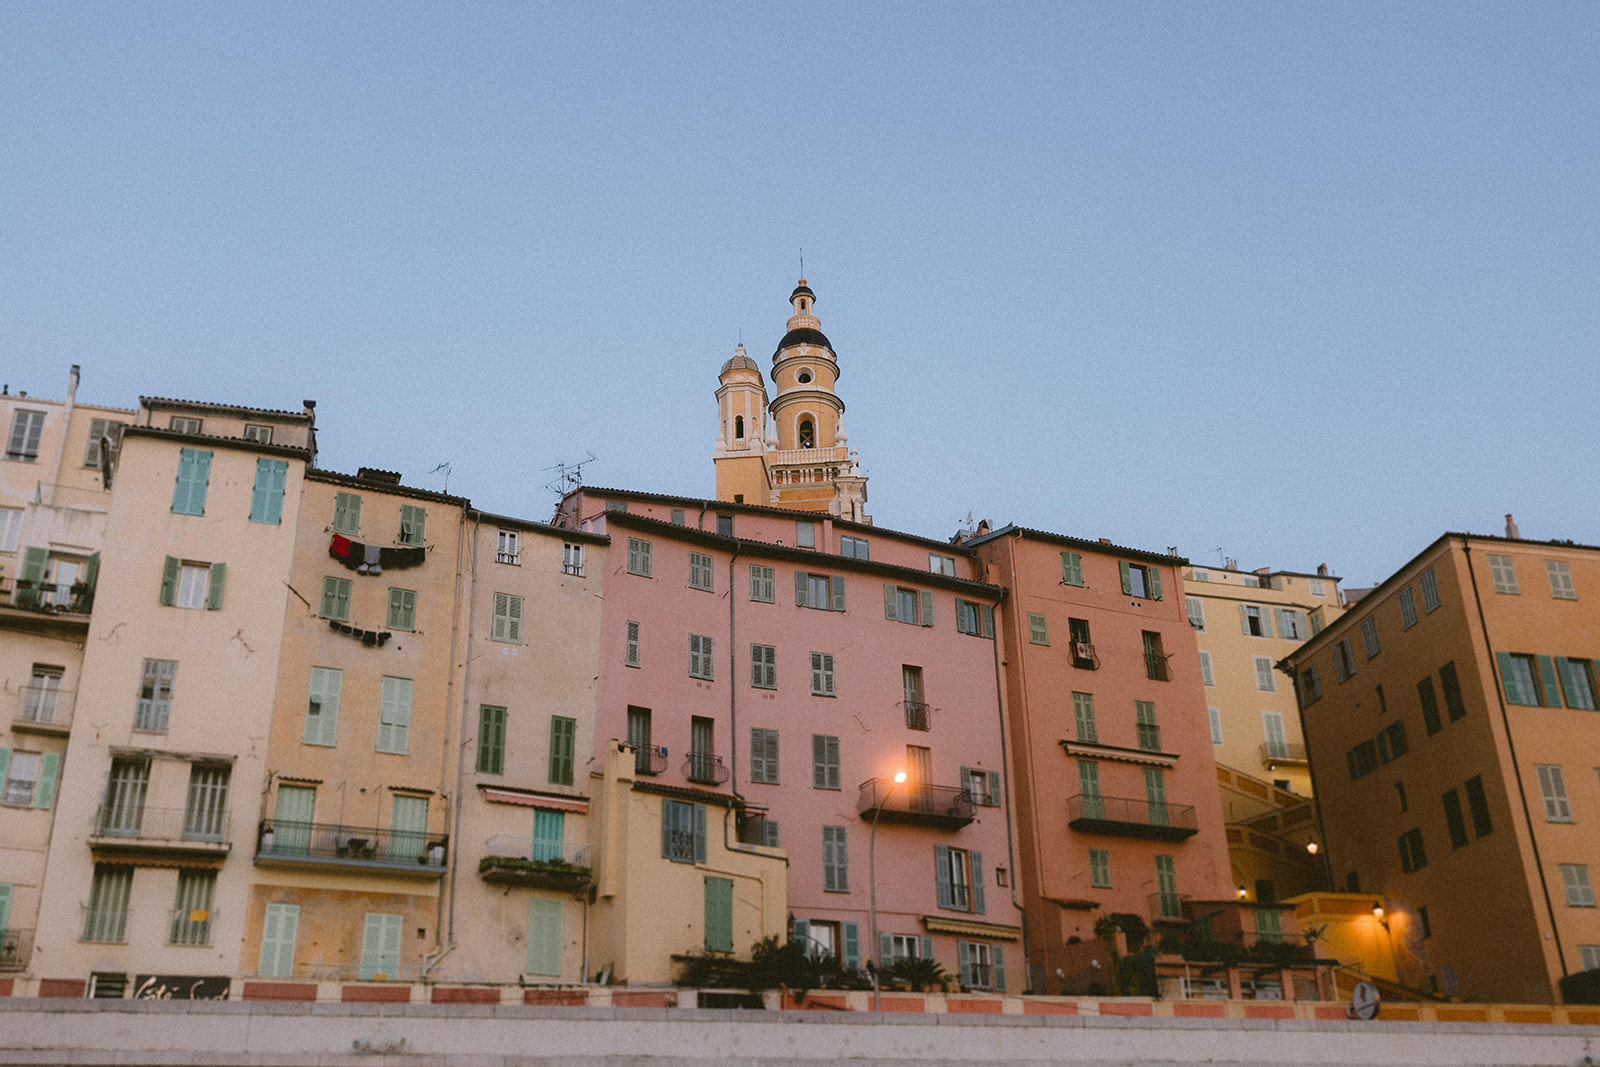 menton early in the morning